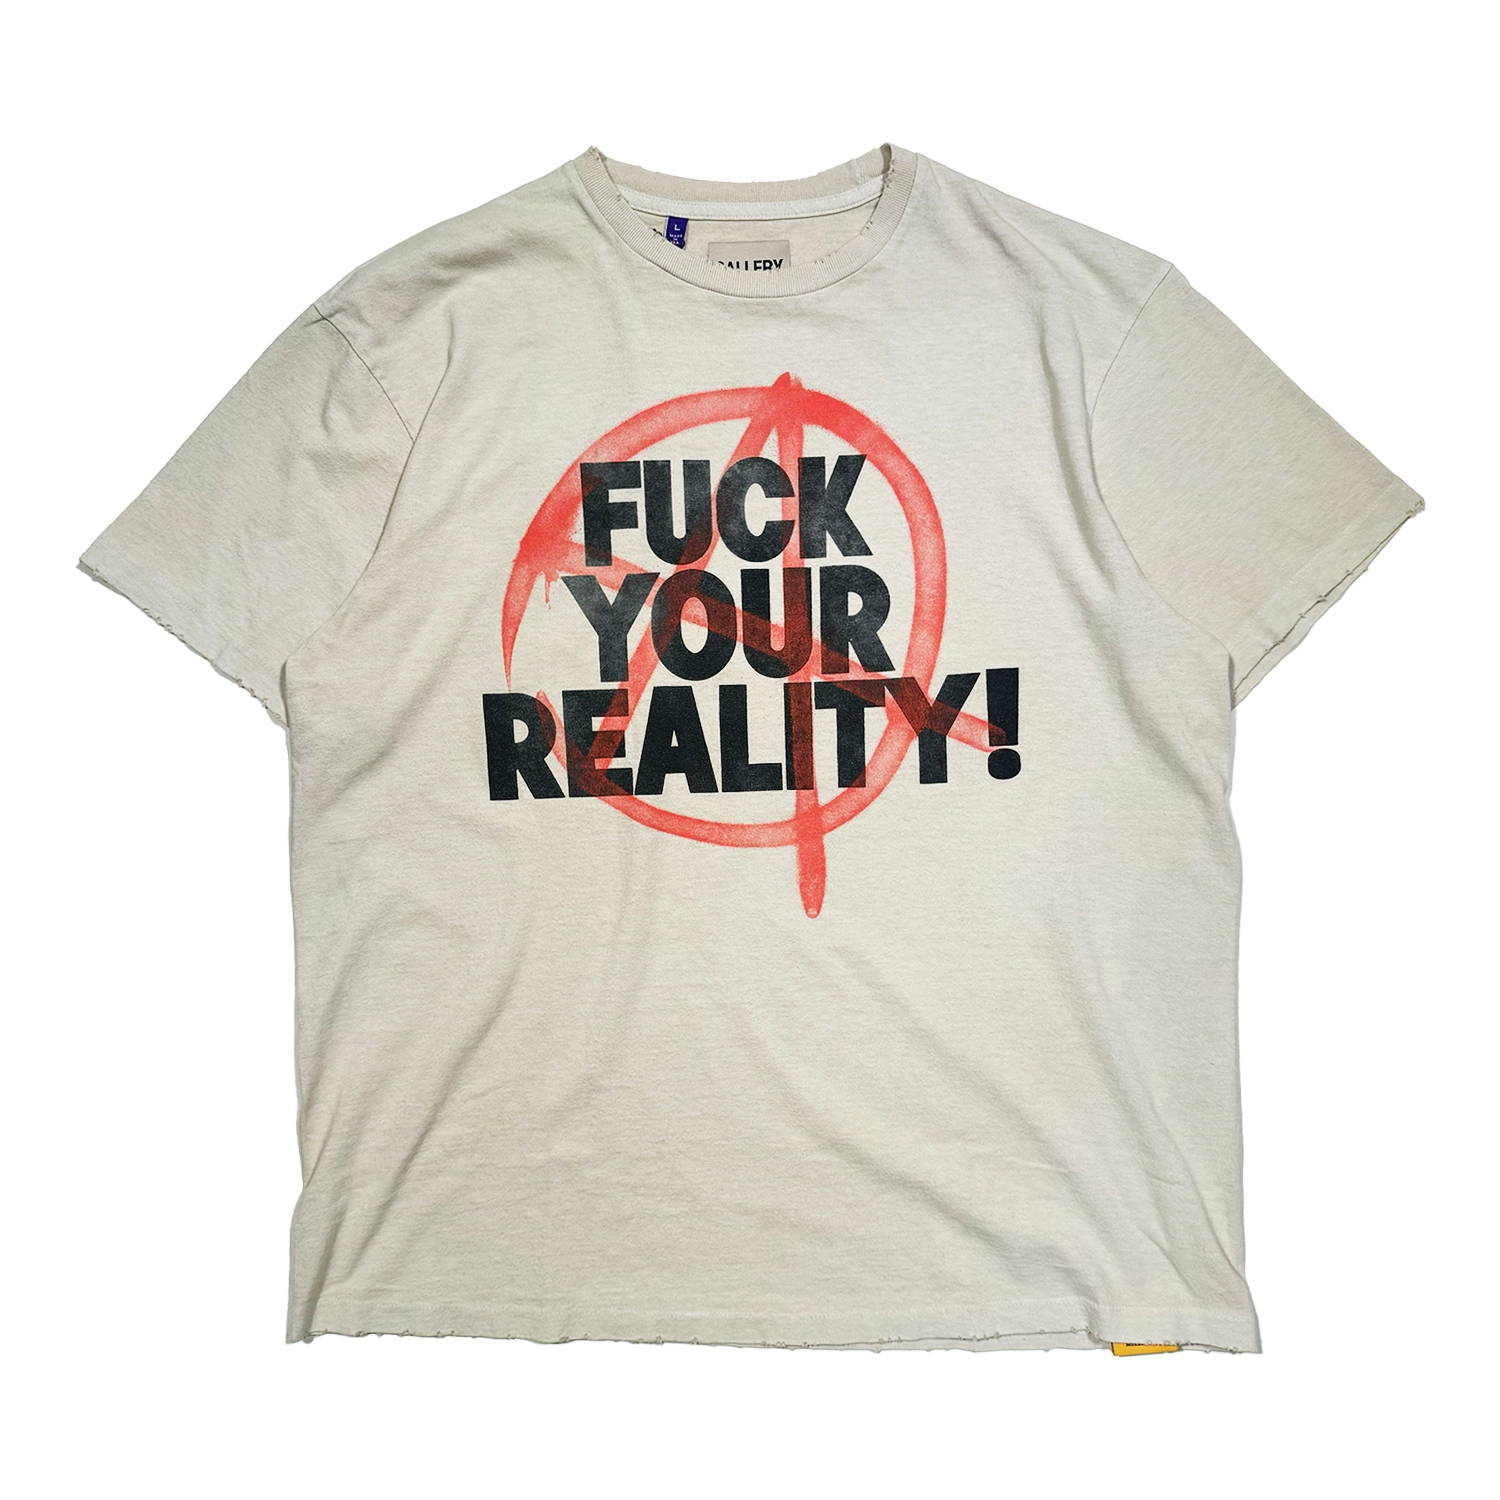 GALLERY DEPT. の FUCK YOUR REALITY TEE ANTIQUE WHITE